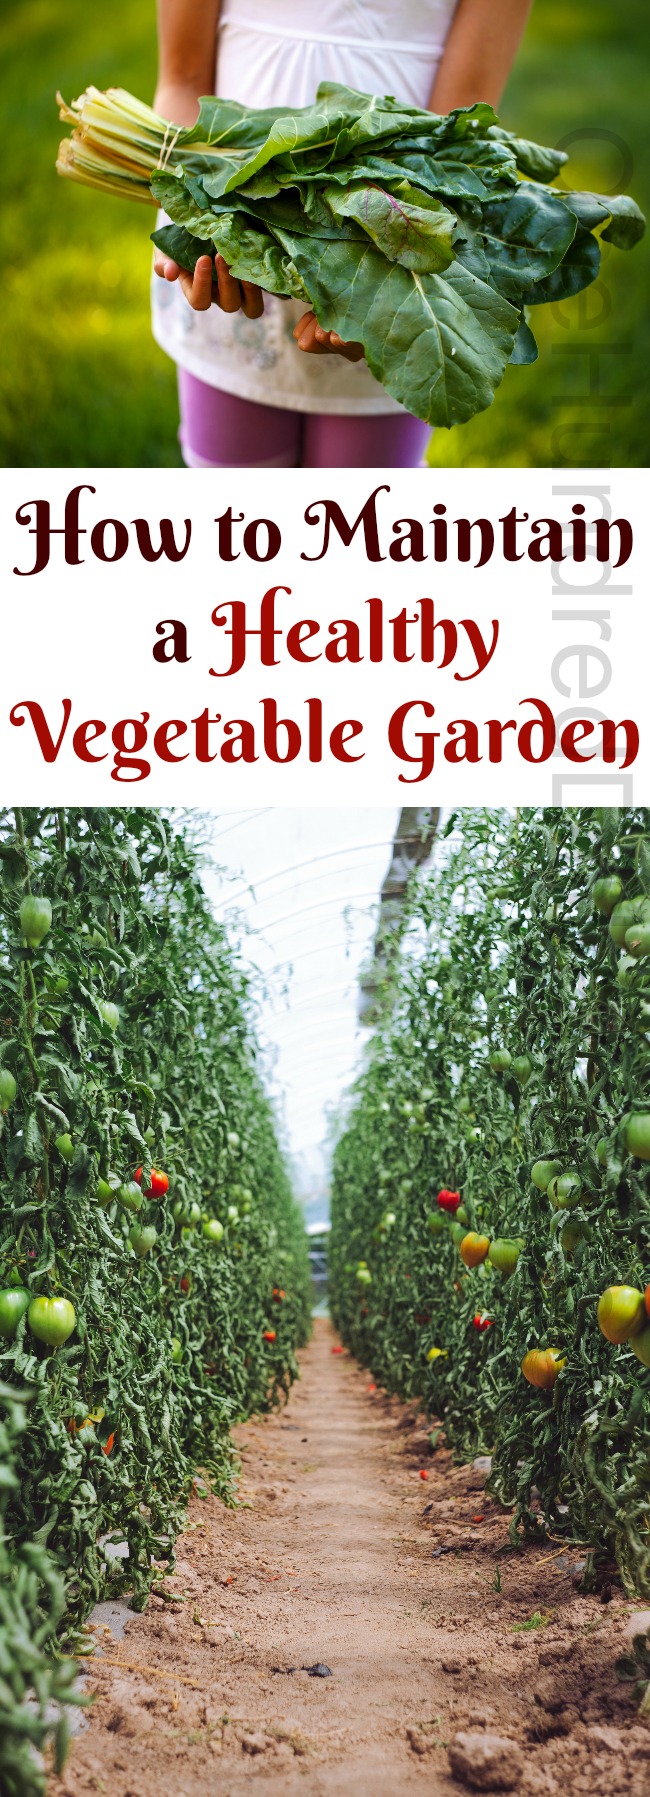 How to Maintain a Healthy Vegetable Garden